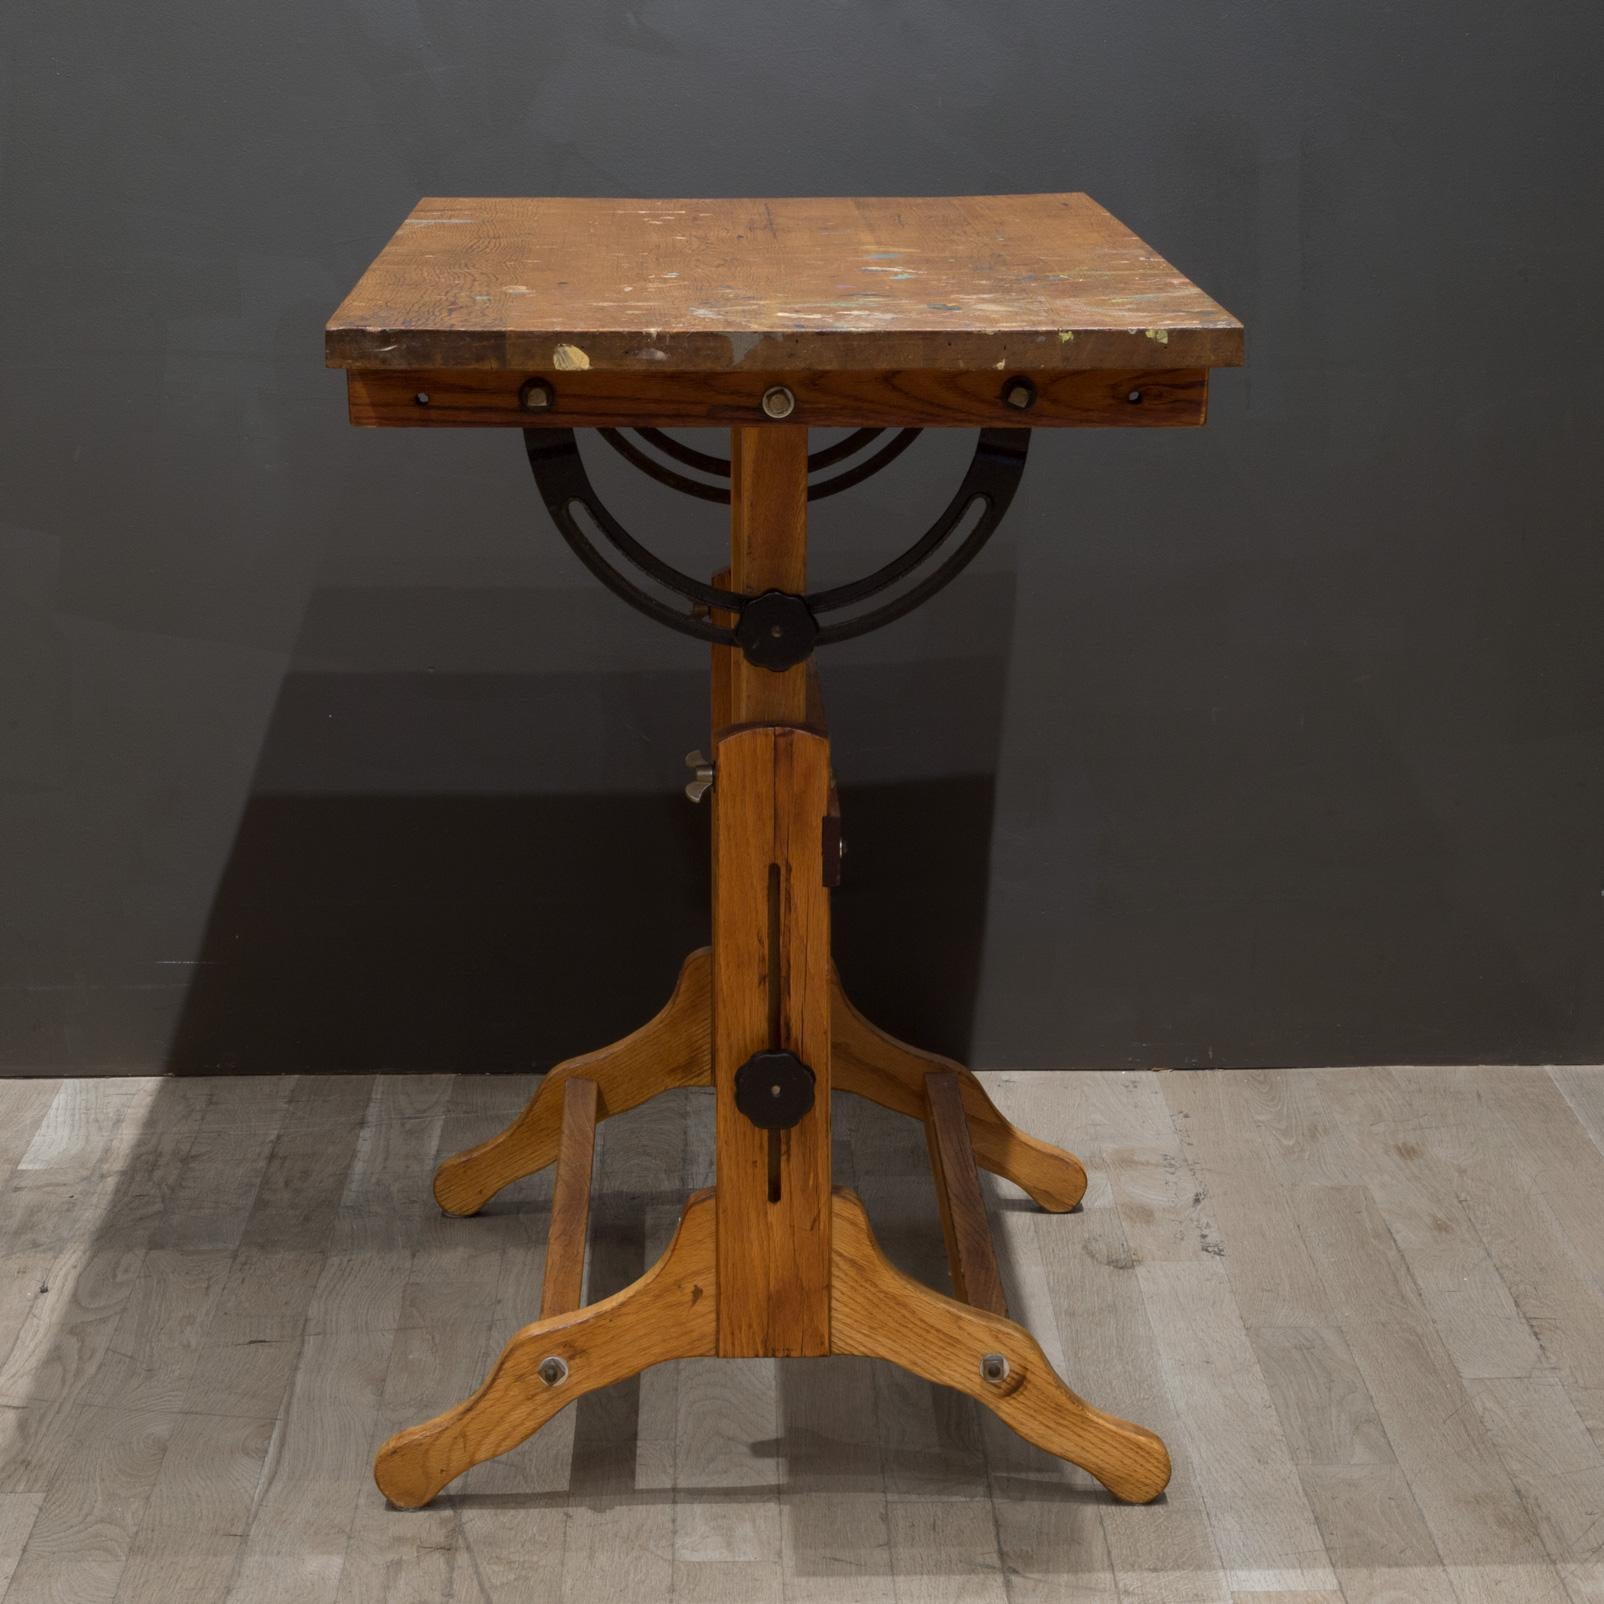 20th Century Antique Adjustable Redwood and Oak Drafting Table c.1930-1940